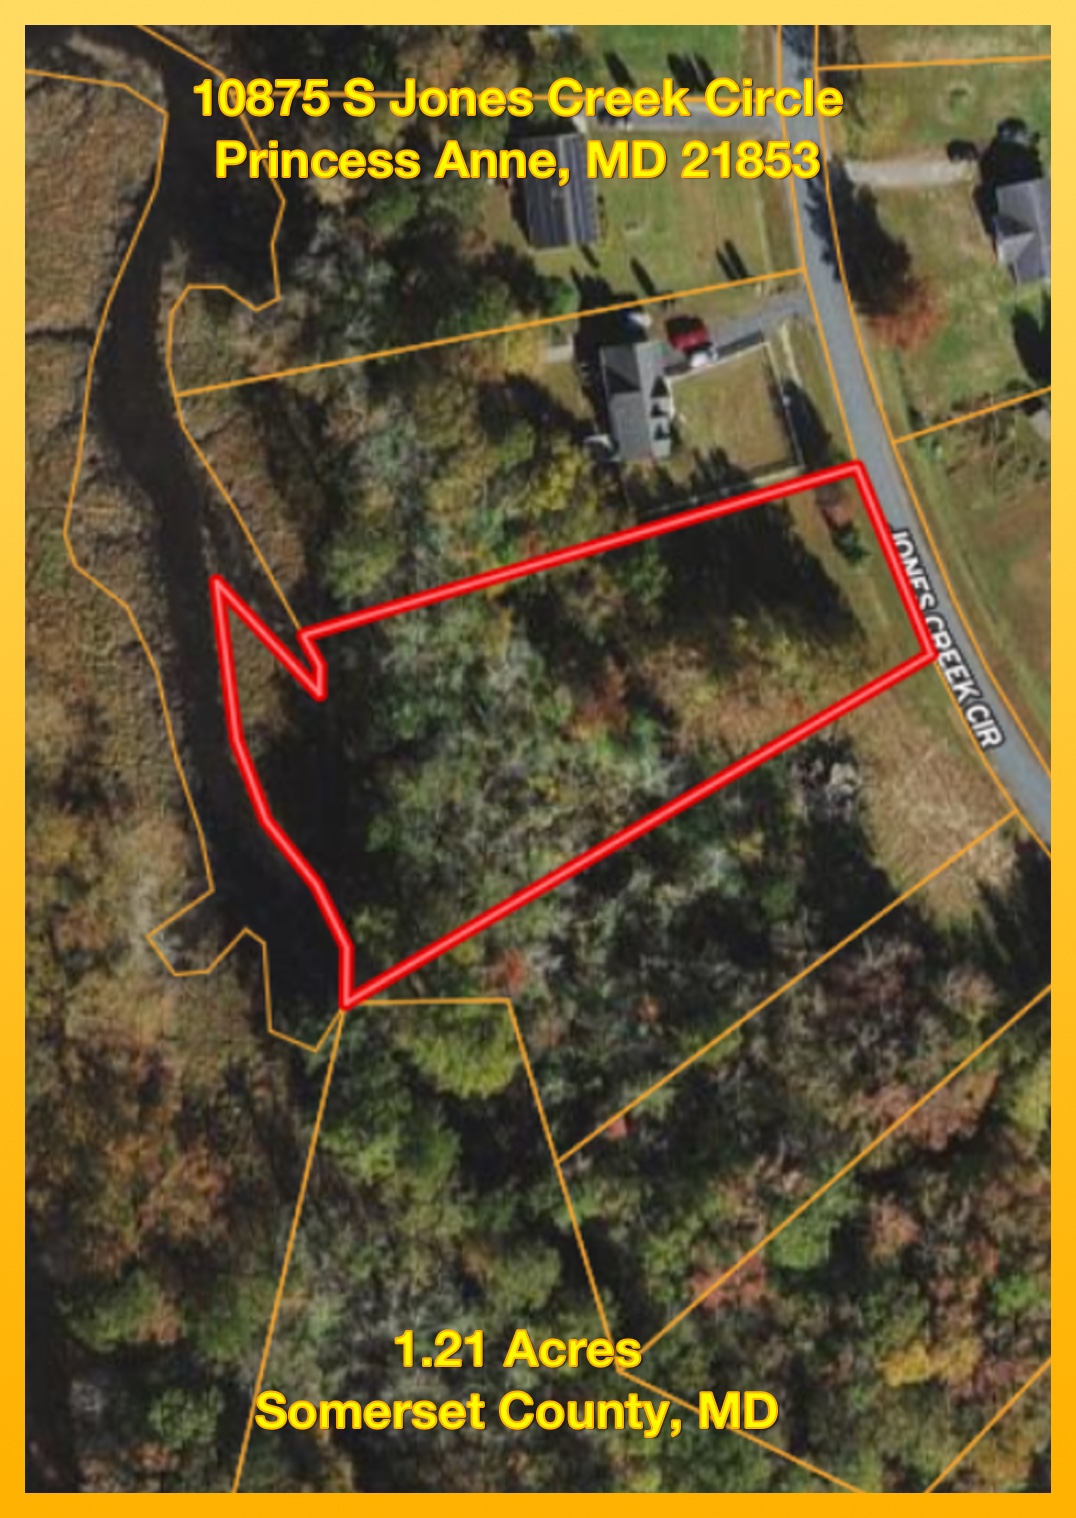 1.21 Acres in Somerset County, MD (Princess Anne)